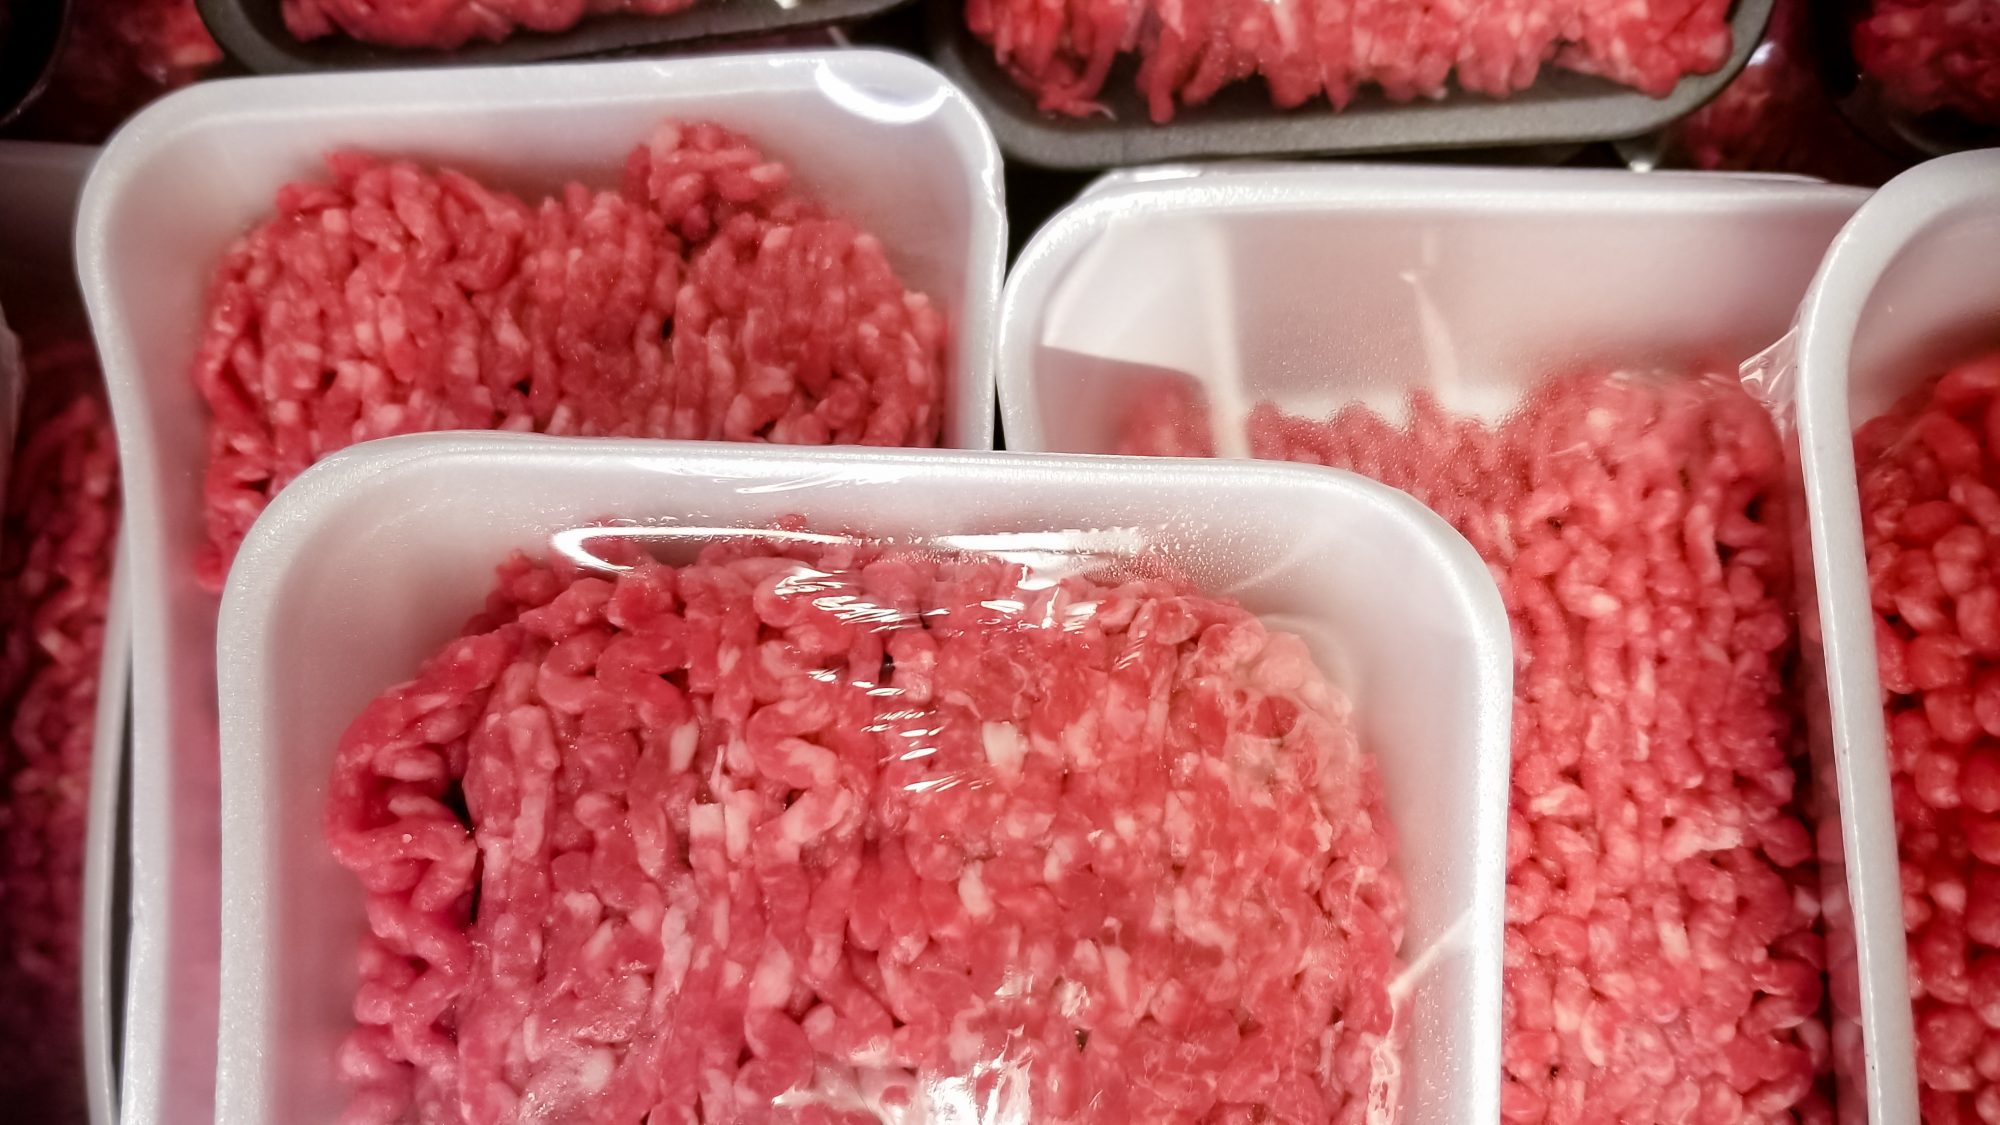 Ground beef in packaging Getty 7/15/20